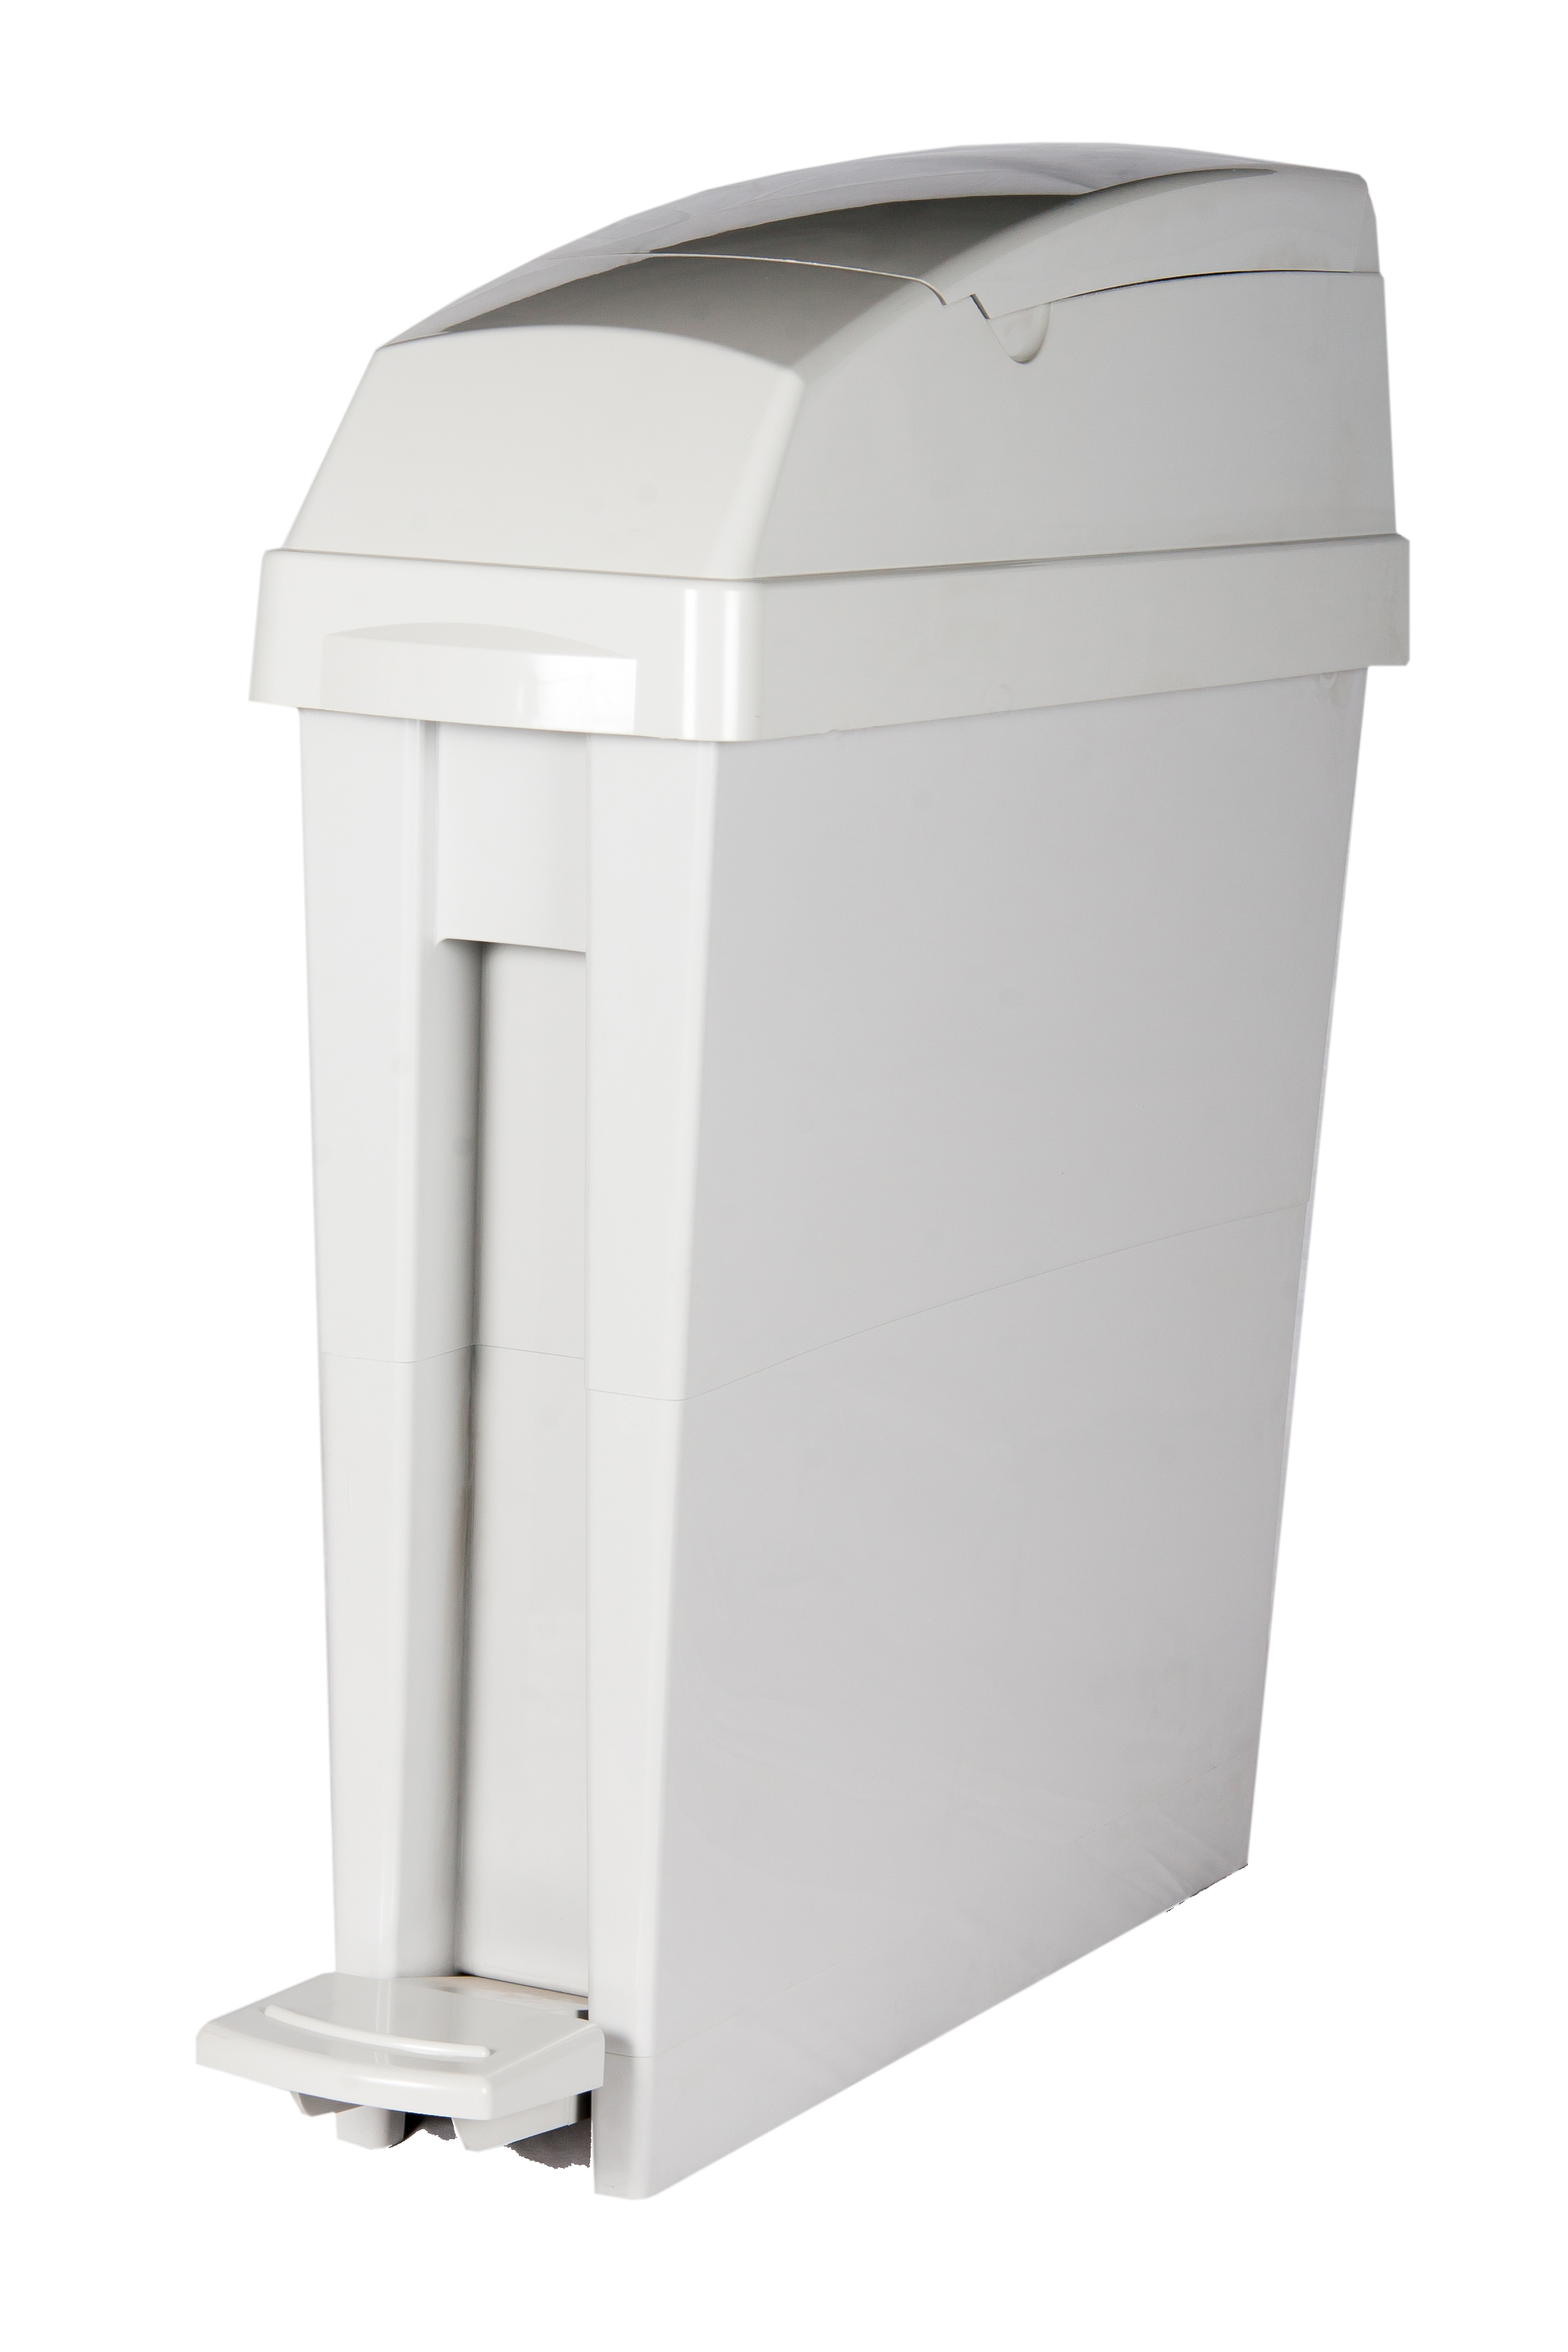 Rubbermaid Commercial Products FG750244 Sanitary Waste Bin Rectangular, 3-Gallon, 6.1-Inches x 16.5-Inches x 19.3-Inches, Gray 